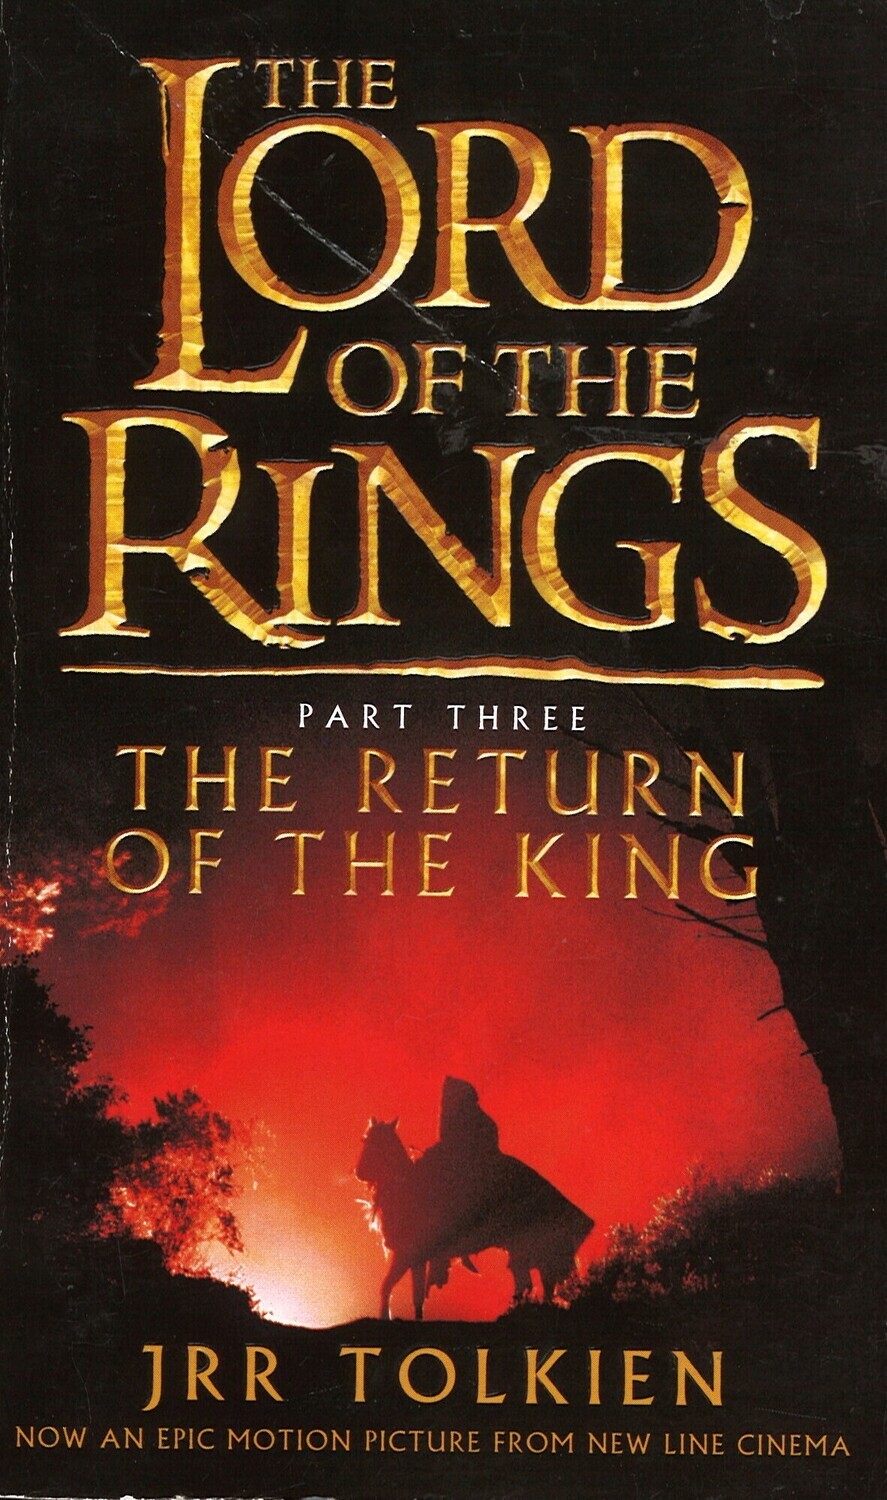 The Lord of The Rings: The Return of The King Part 3